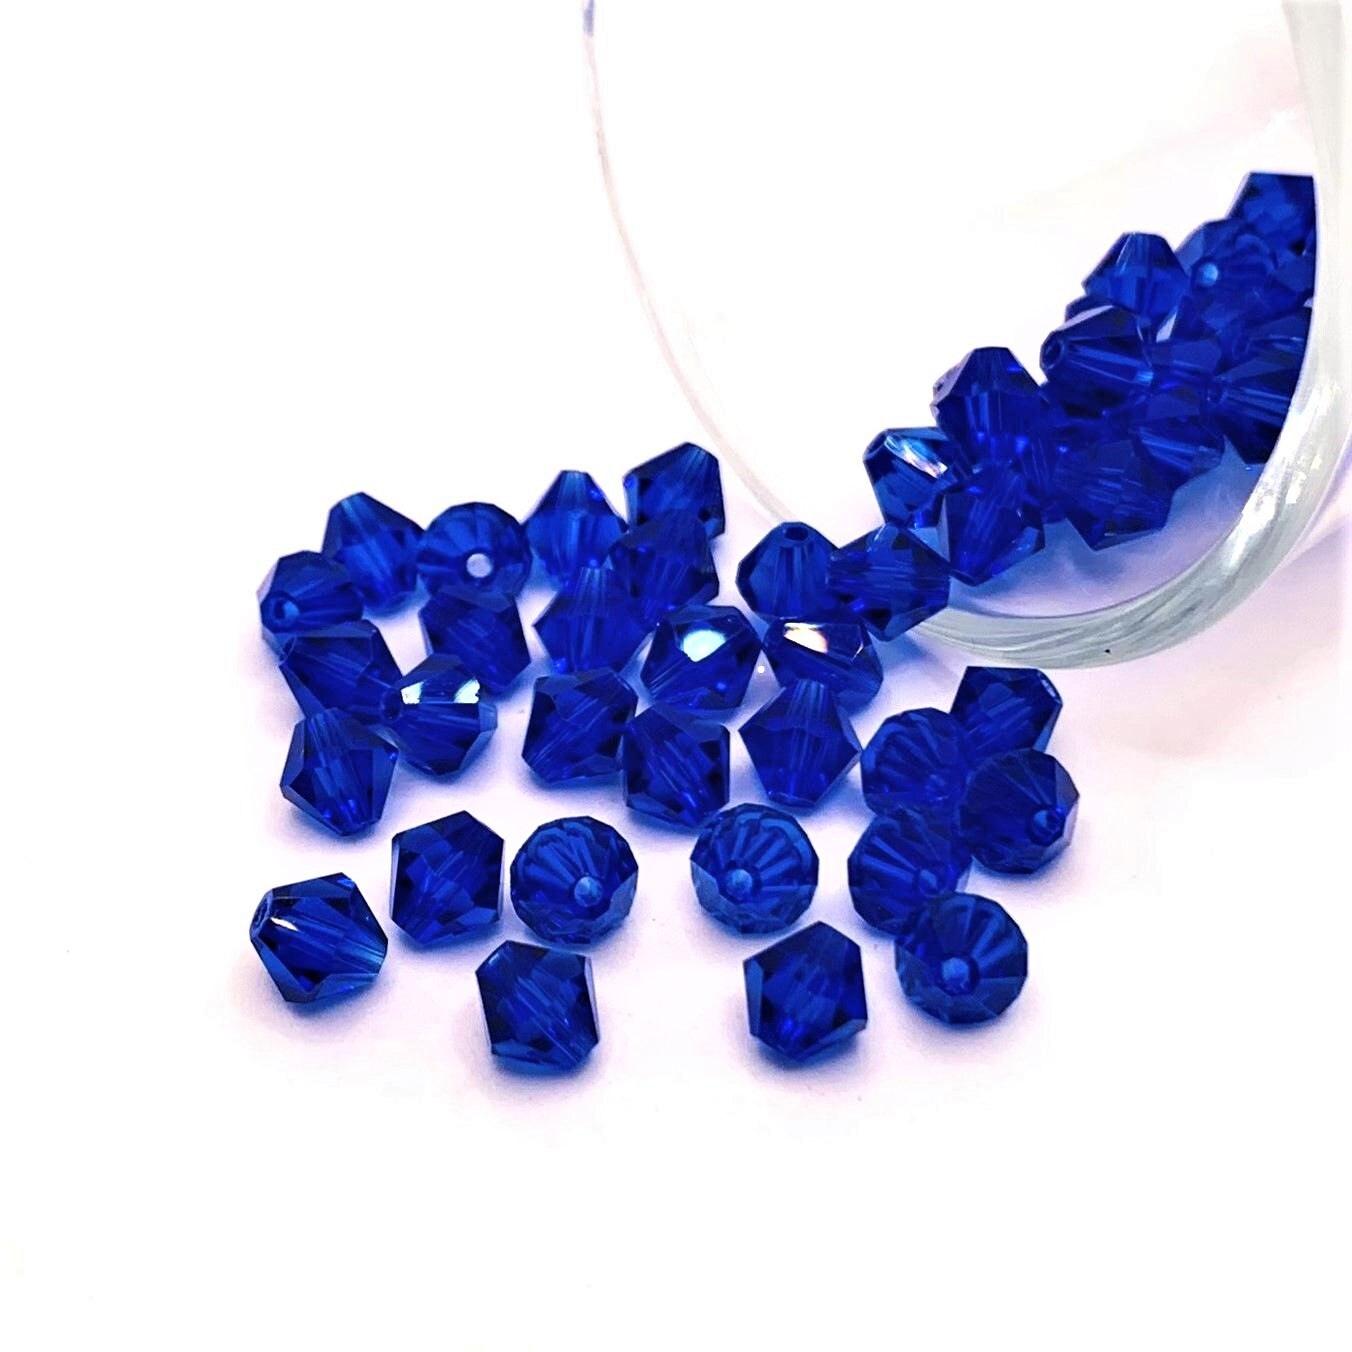 4, 20 or 50 Pieces: 6 mm Bicone Blue Imitation Crystal September Birthstone Beads